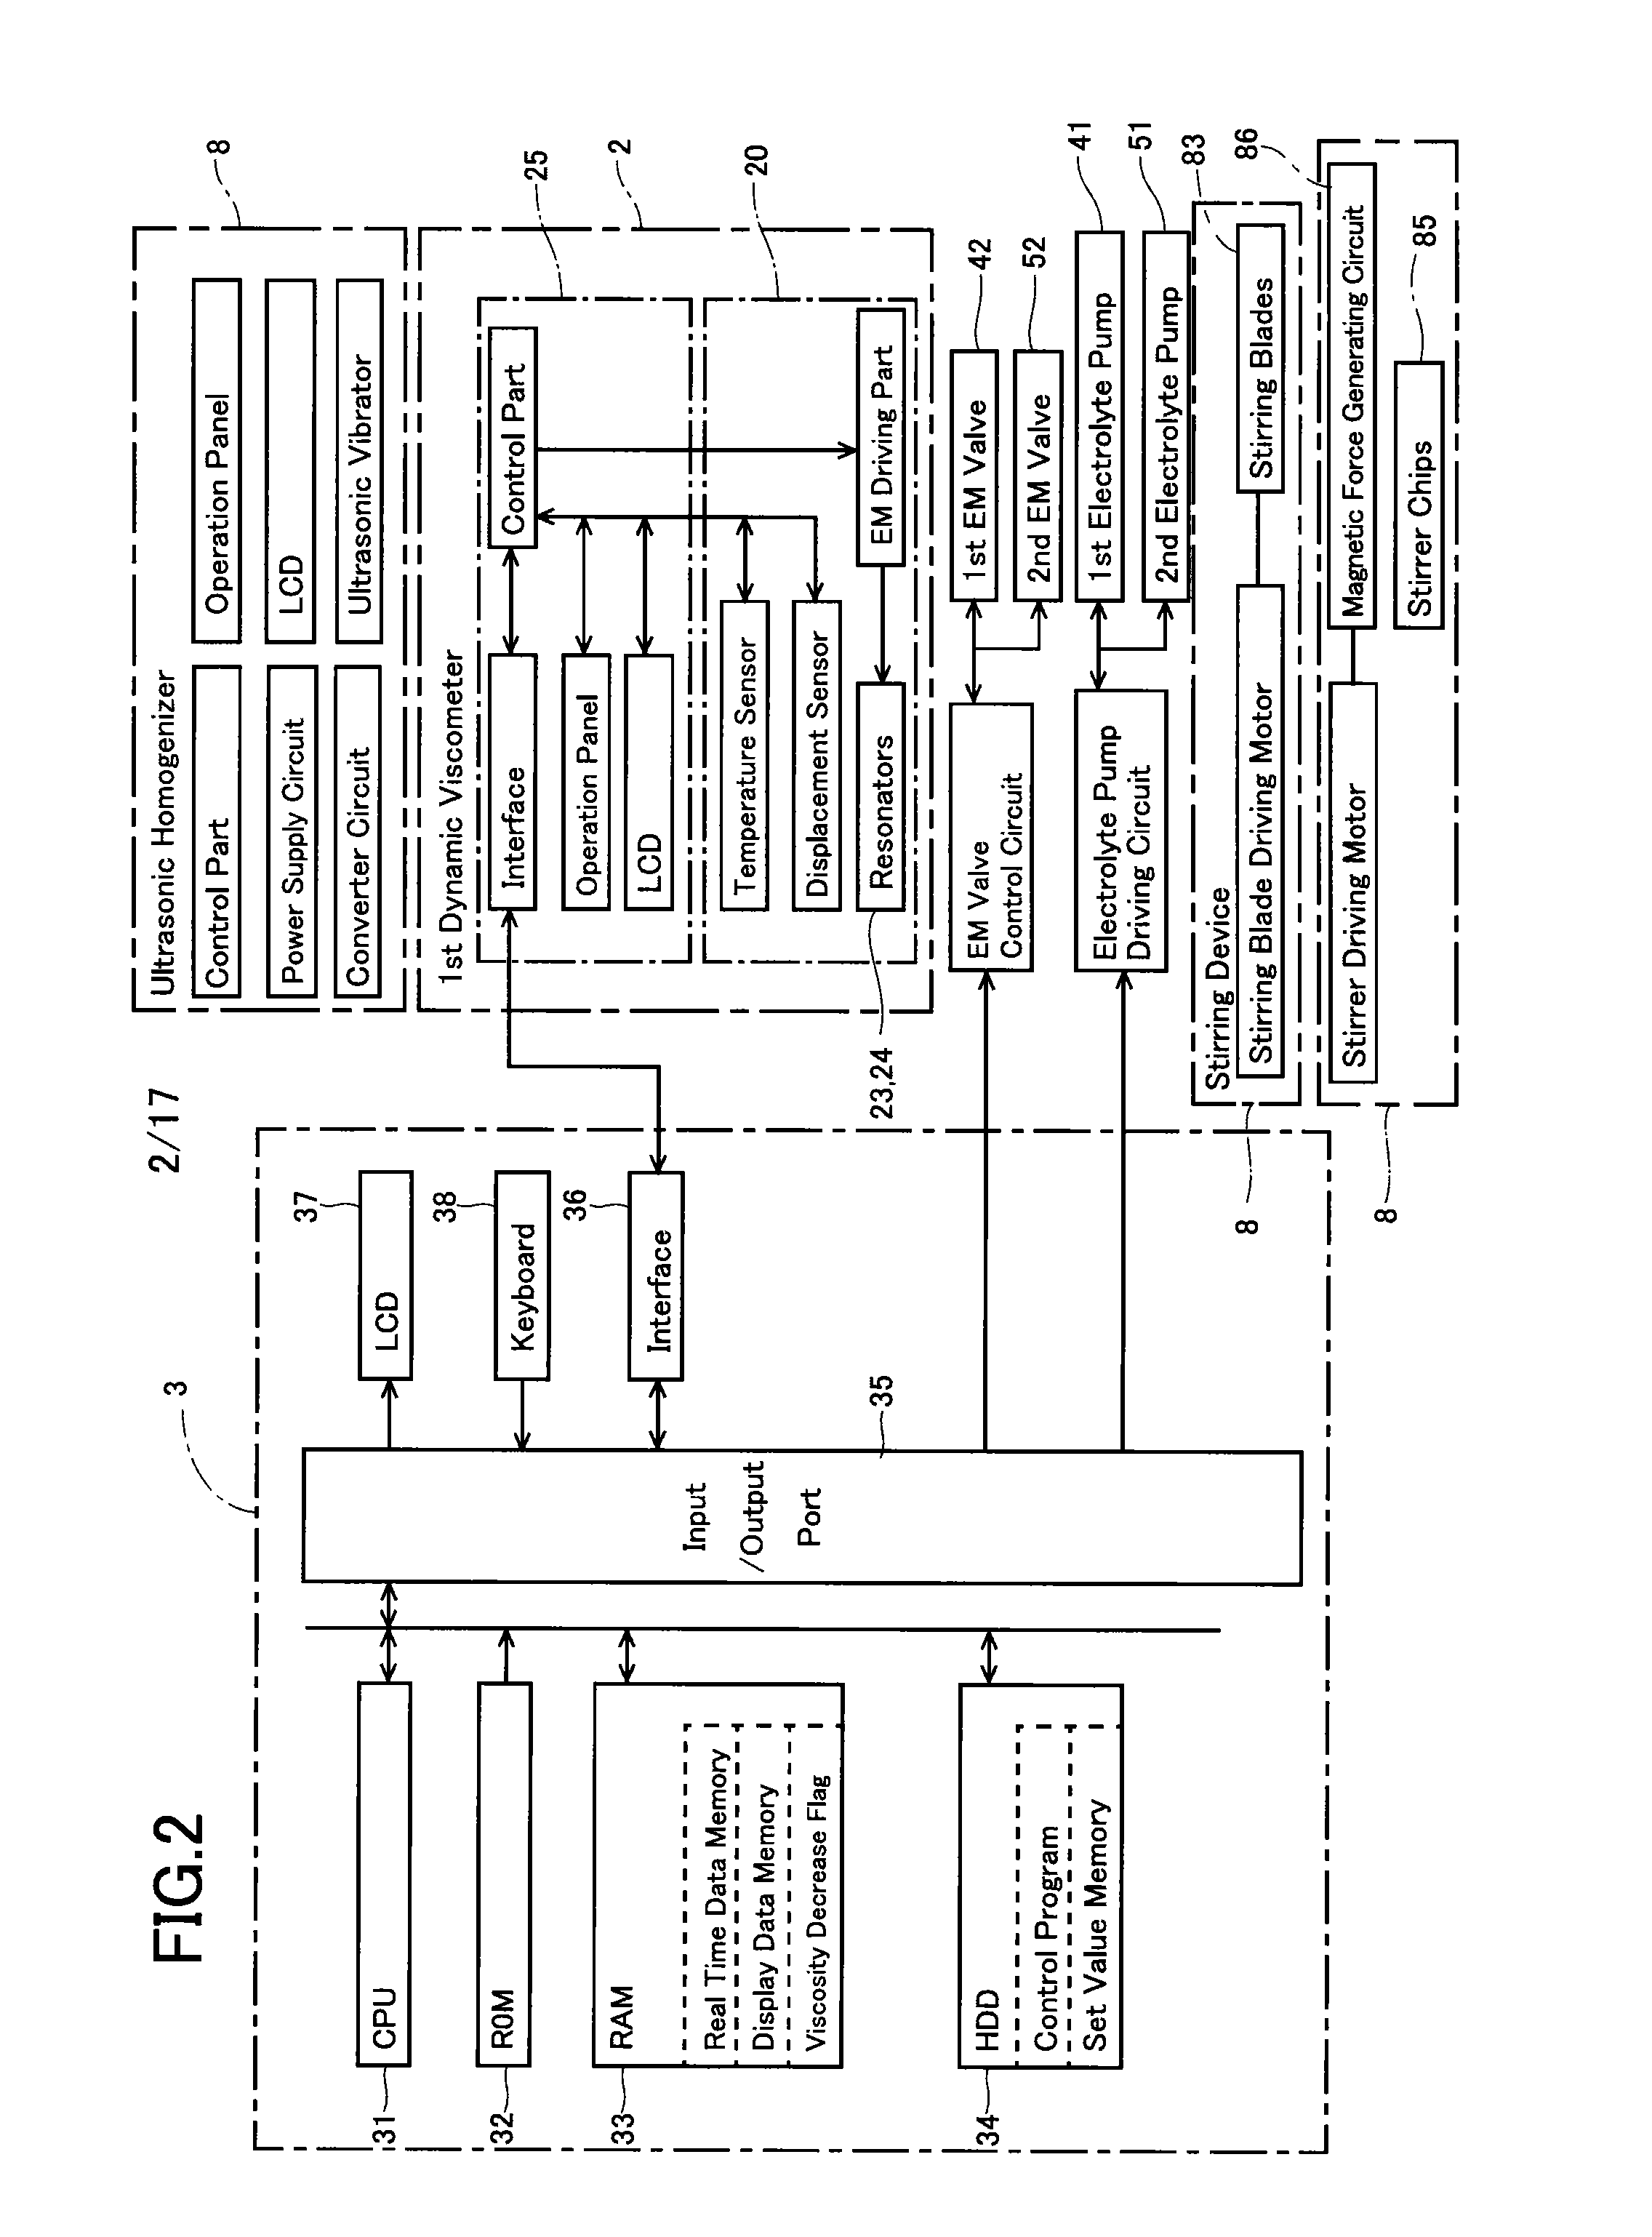 Device and process for producing composite particles